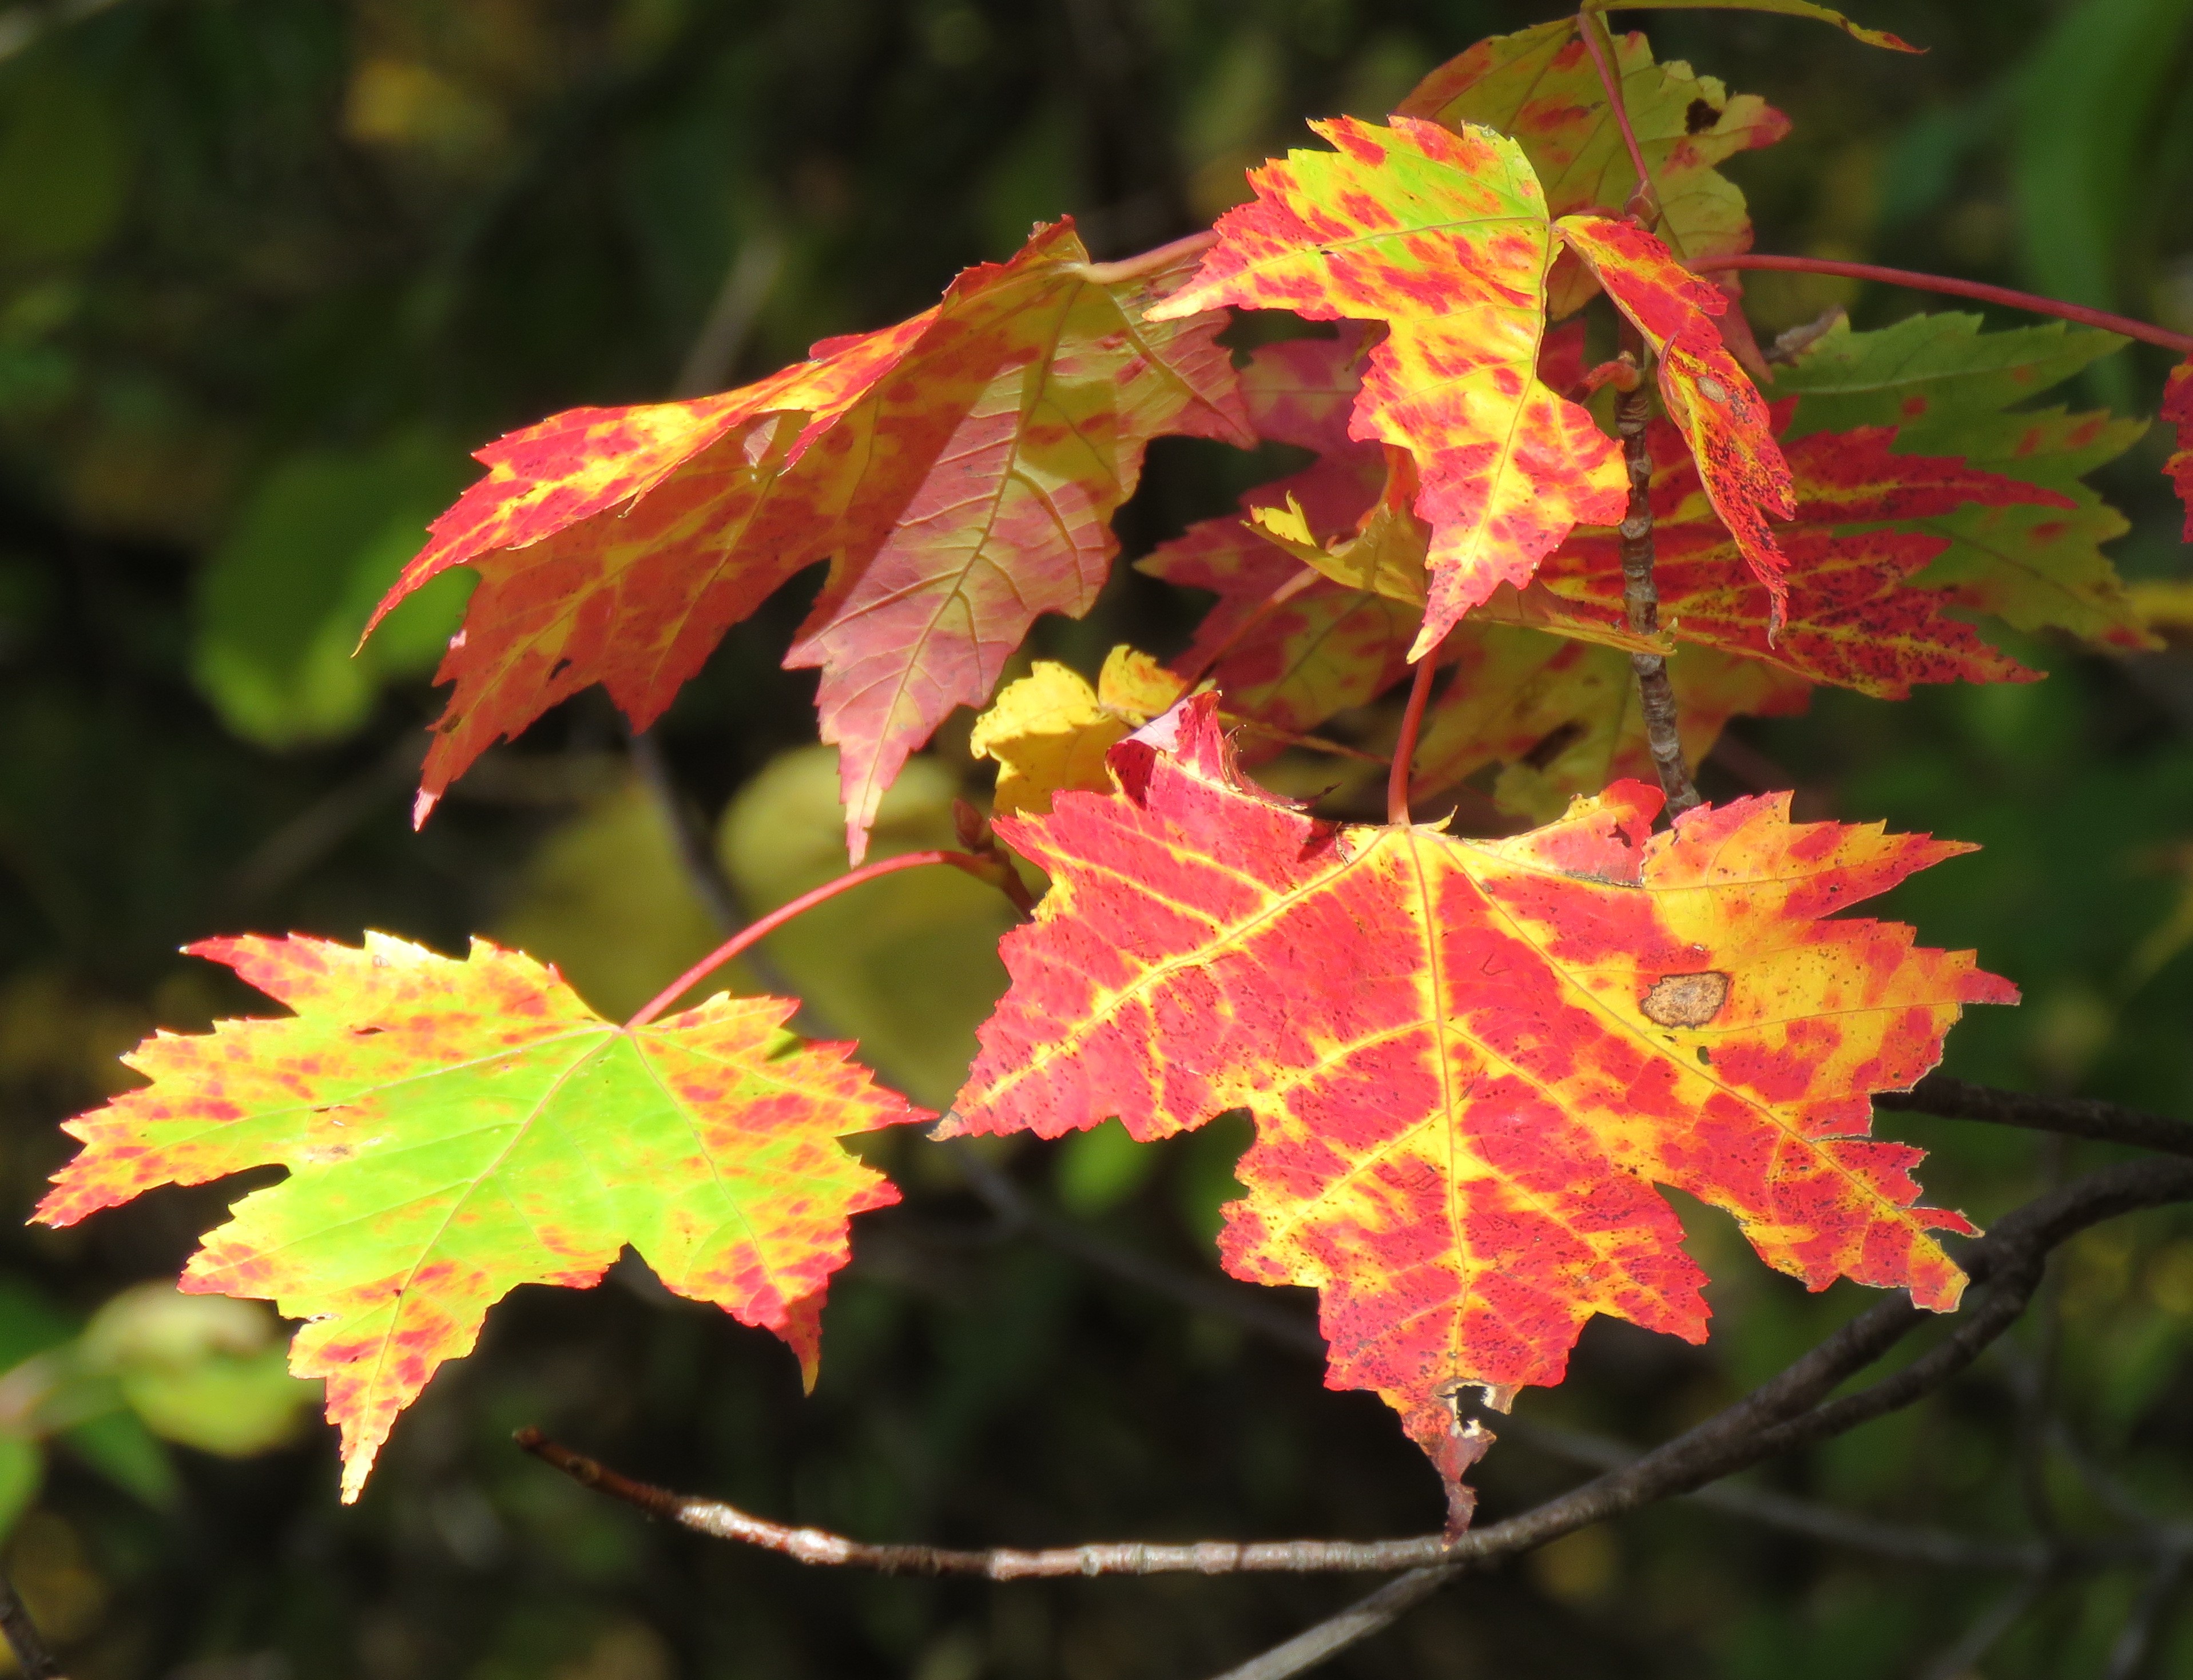 A close up photograph of maple leaves on a branch. The leaves are multi-colored (red, yellow, and green) with dappled spots of sunlight.